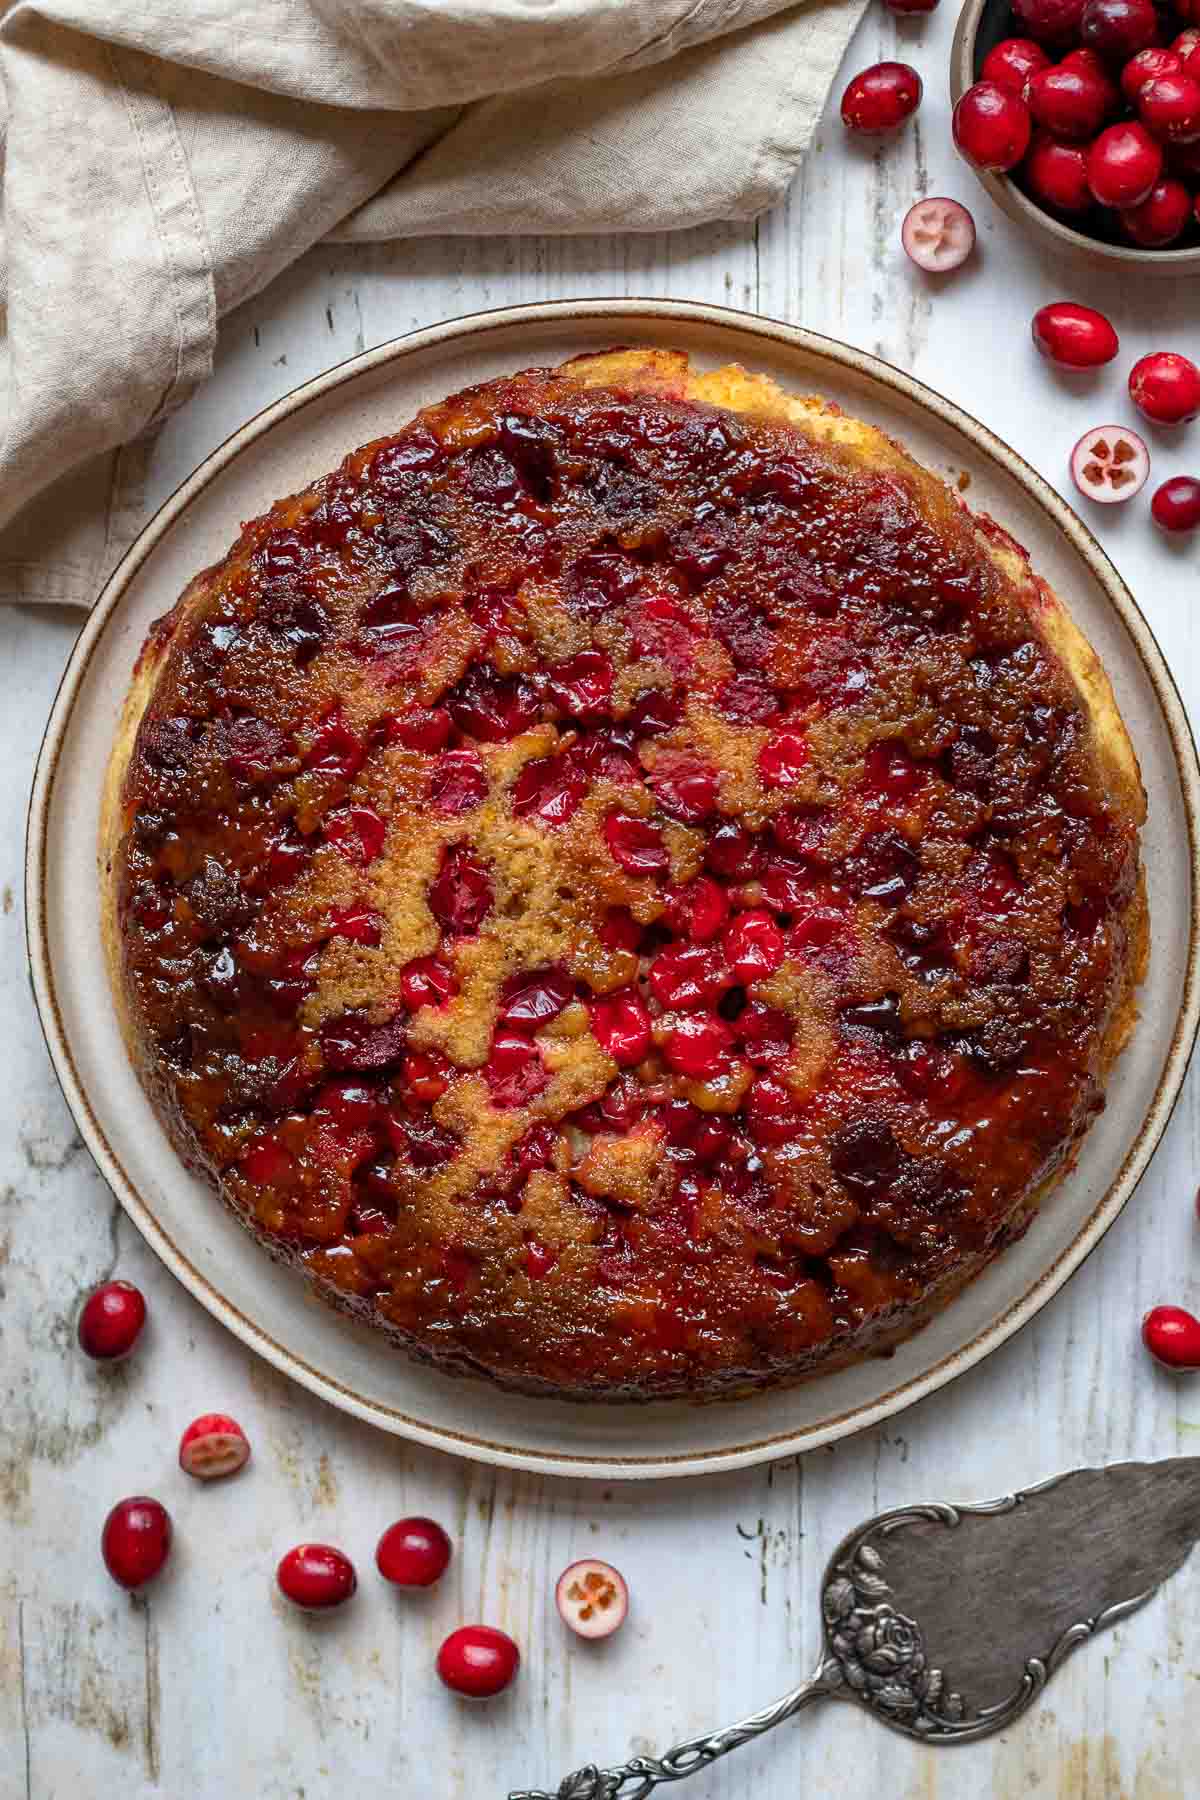 Cranberry Upside-Down Cake fresh baked in cast iron skillet